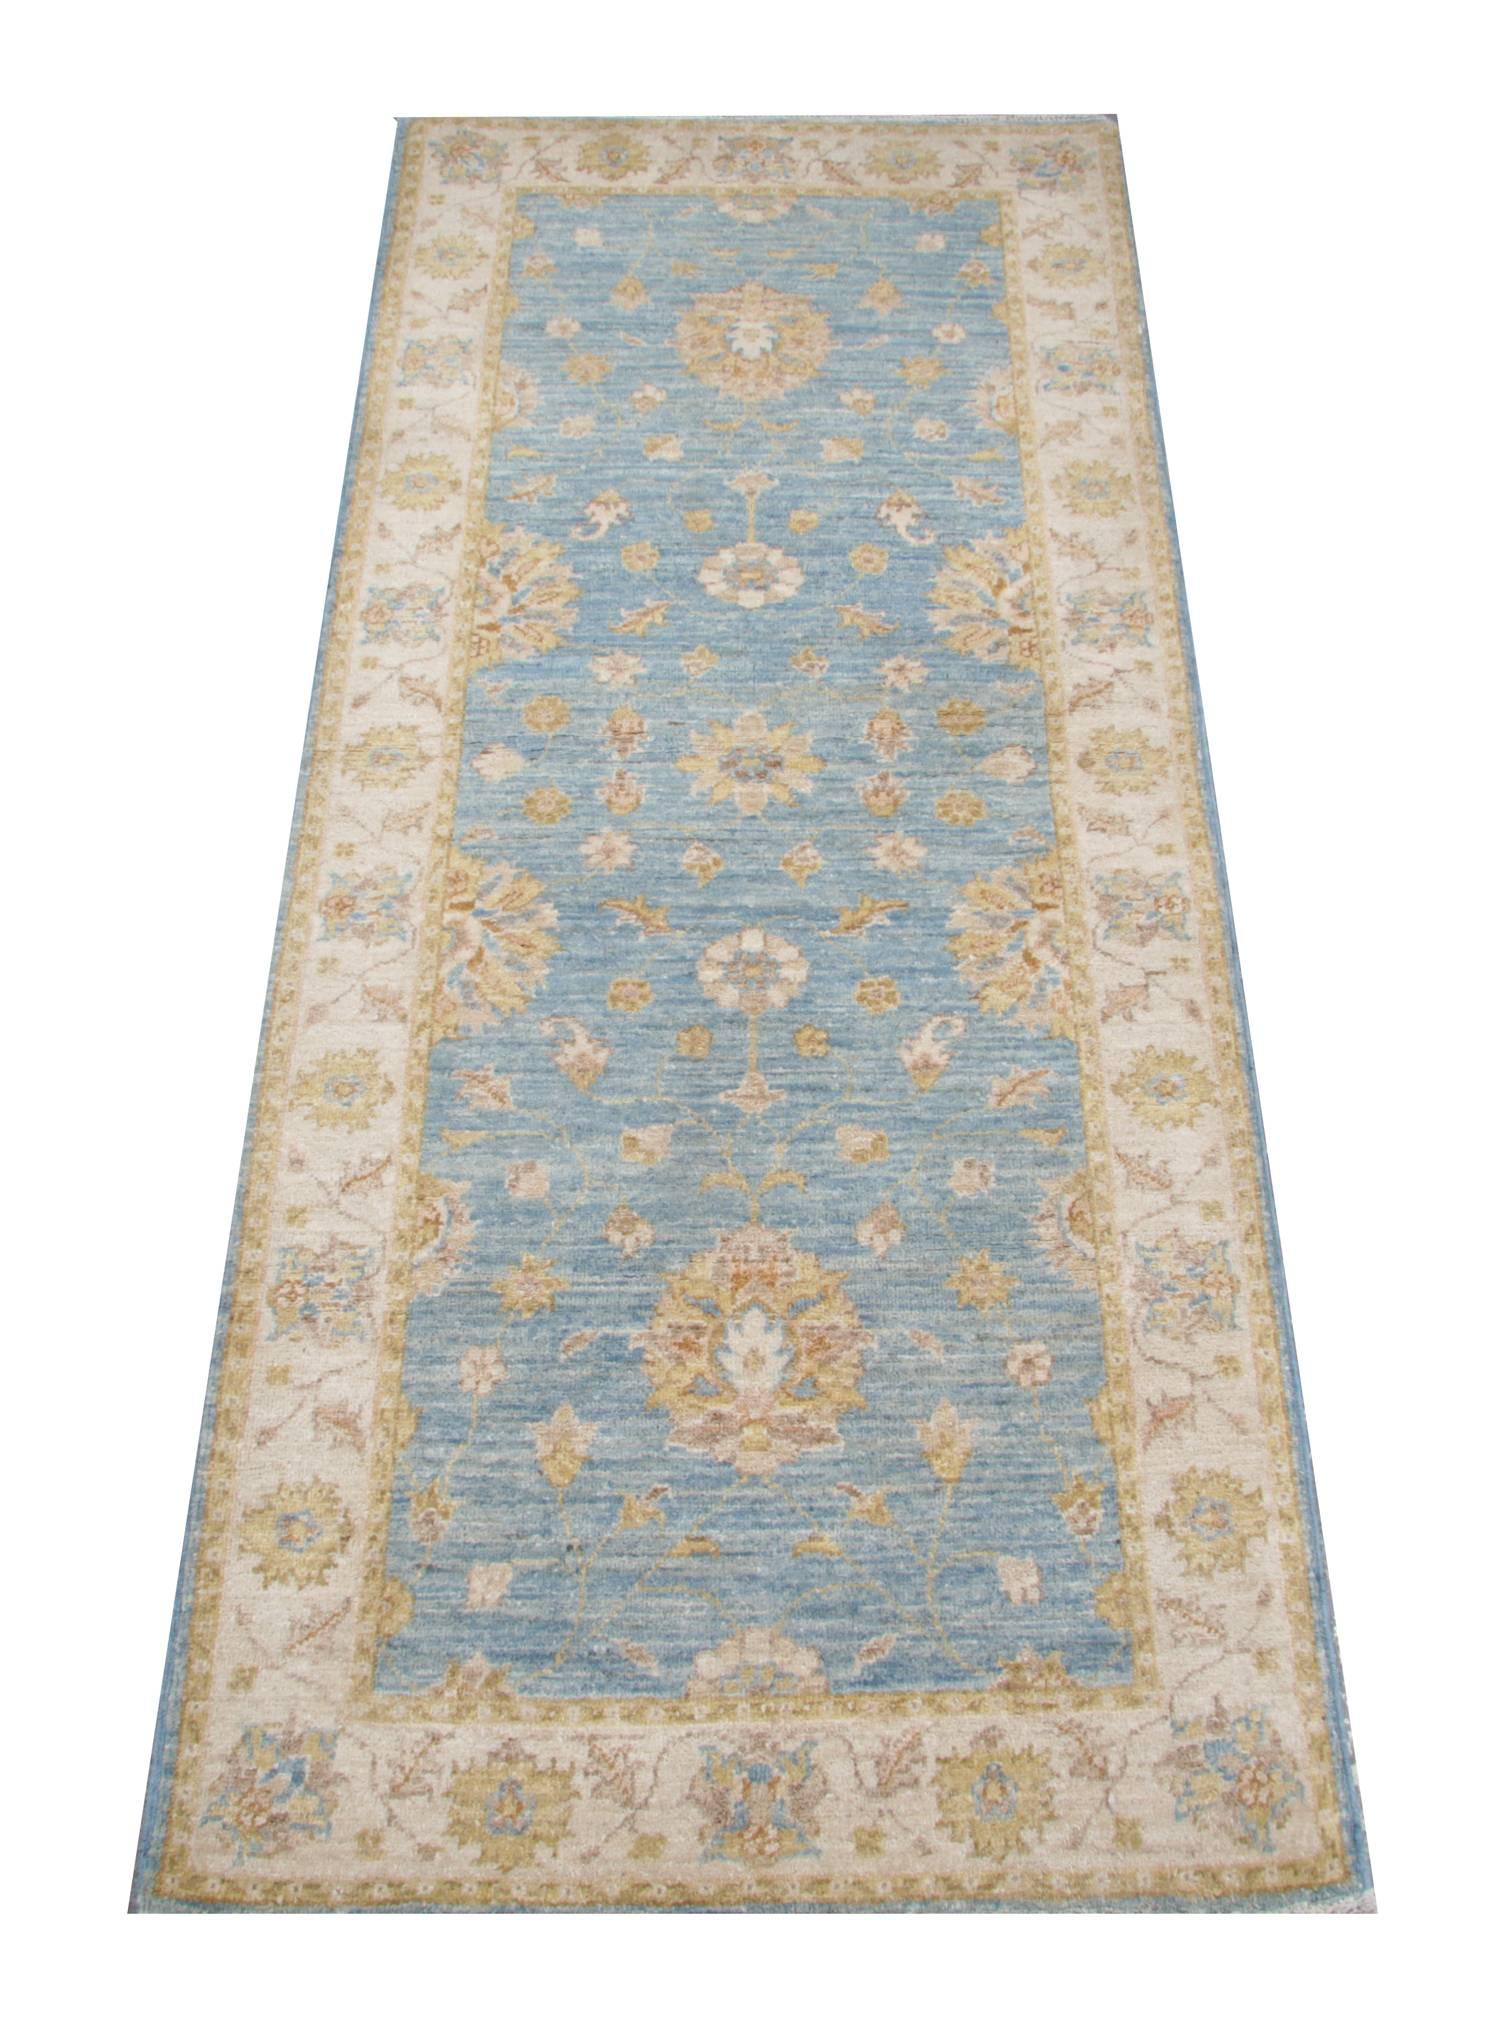 This kind rugs and runners are in the same style of Persian Ziegler Sultanabad runner made on our own looms by our master weavers in Afghanistan, this blue rug runner is made with all natural vegetable dyes all handmade wool rugs. The large-scale